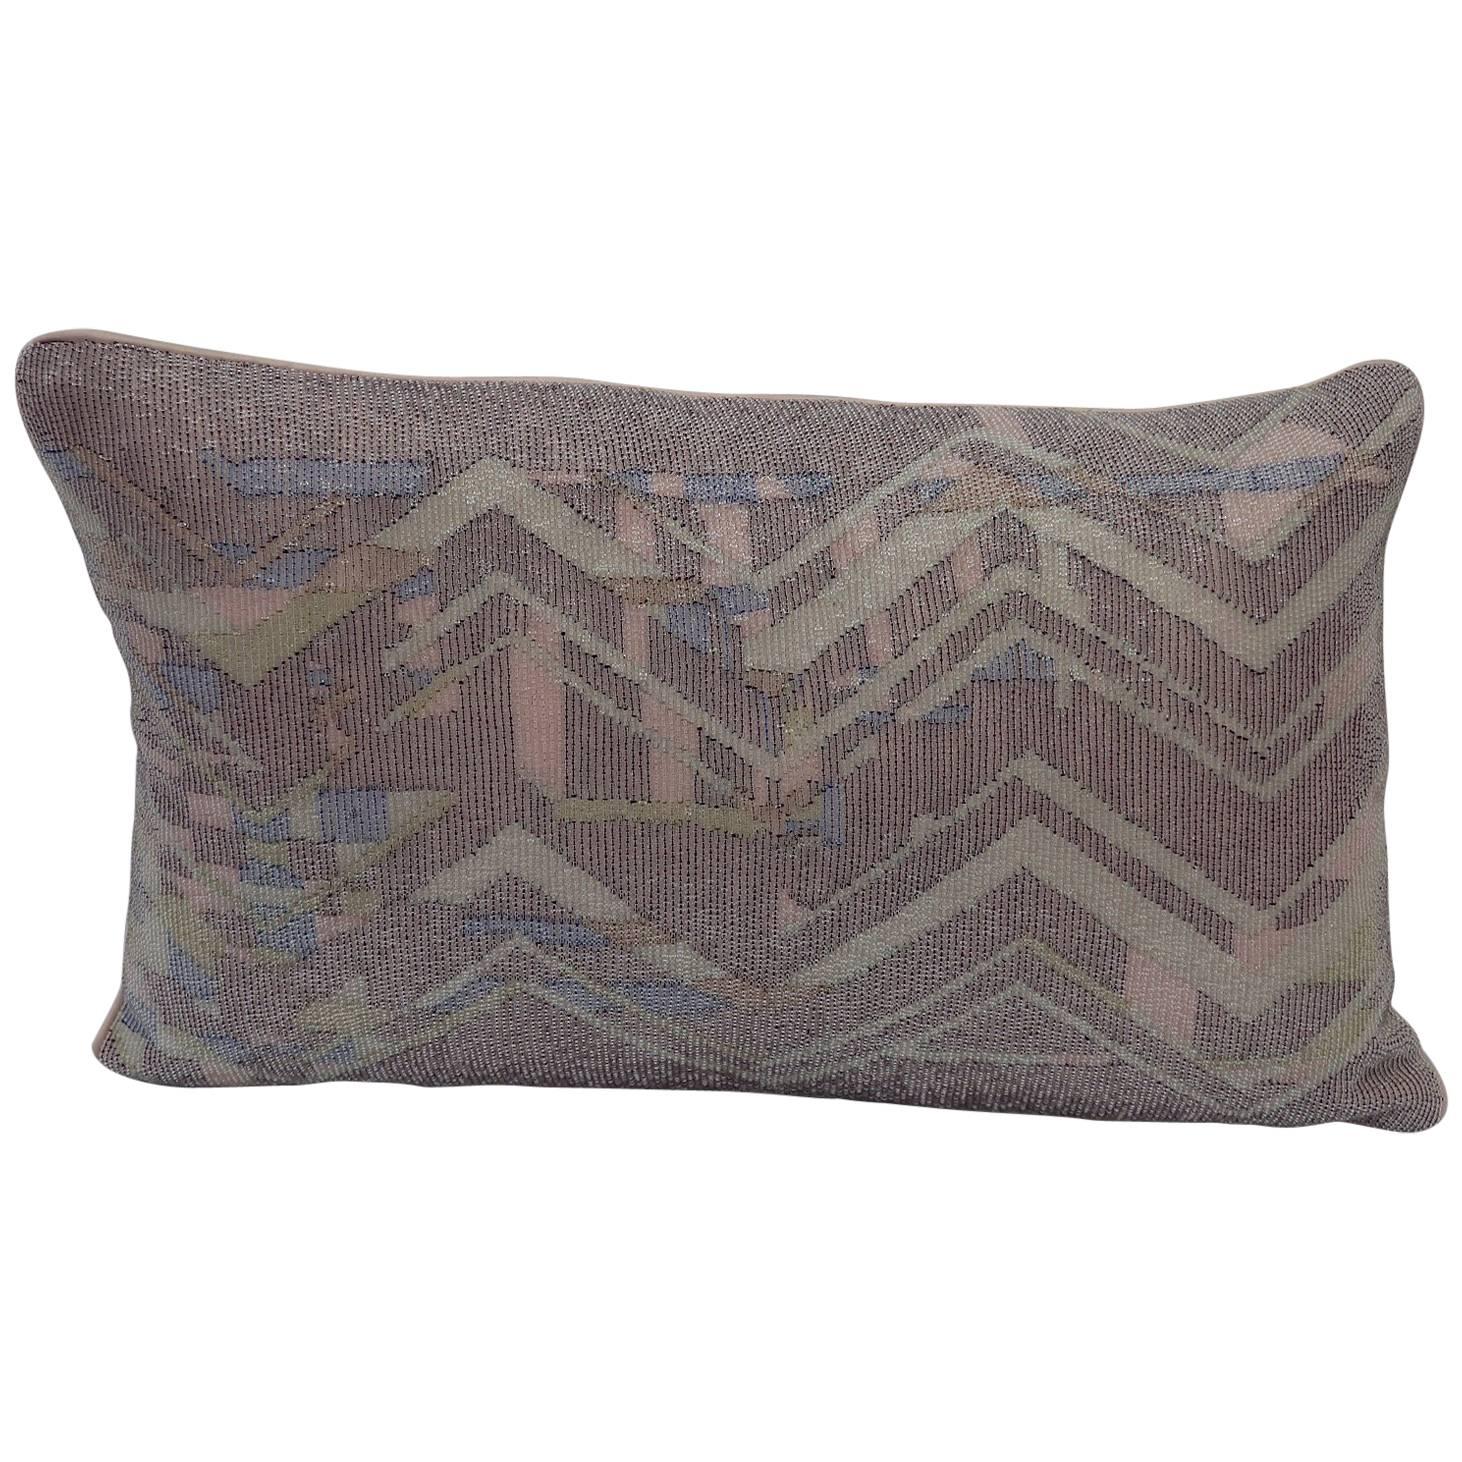 Handcrafted Embroidered Beaded Textile Pillow Geometric Design For Sale